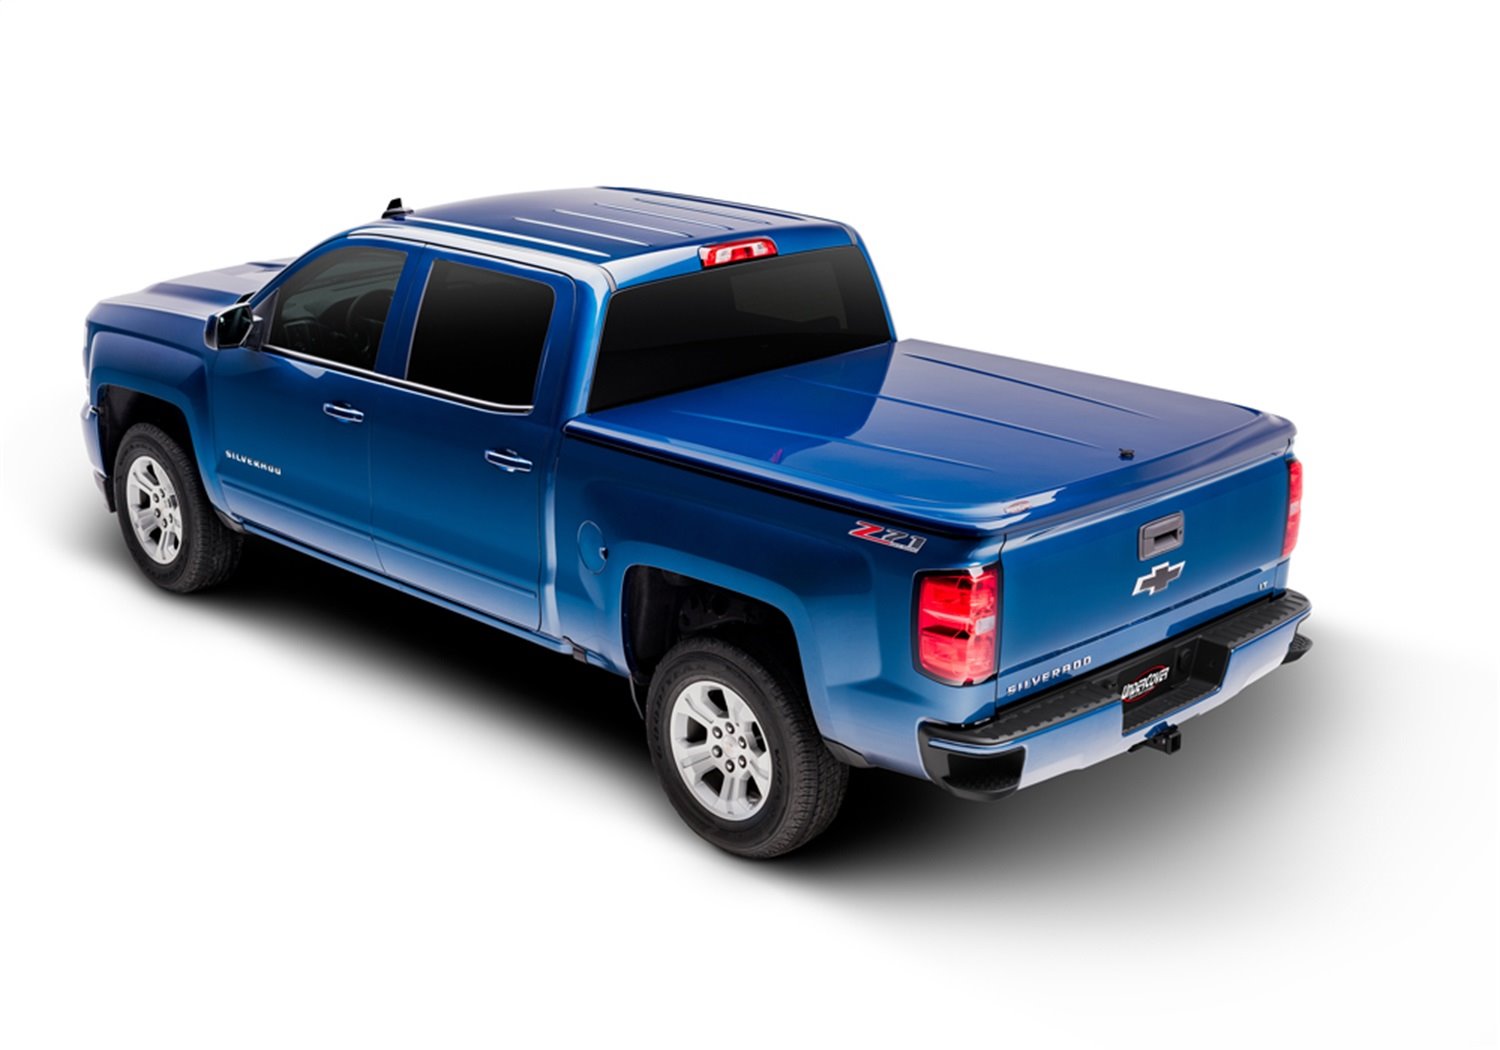 UC2206L-D4 LUX Hard Non-Folding Cover, Fits Select Ford F-150 5'7" Bed Crew (Includes Lightning) D4 Lucid Red Pearl